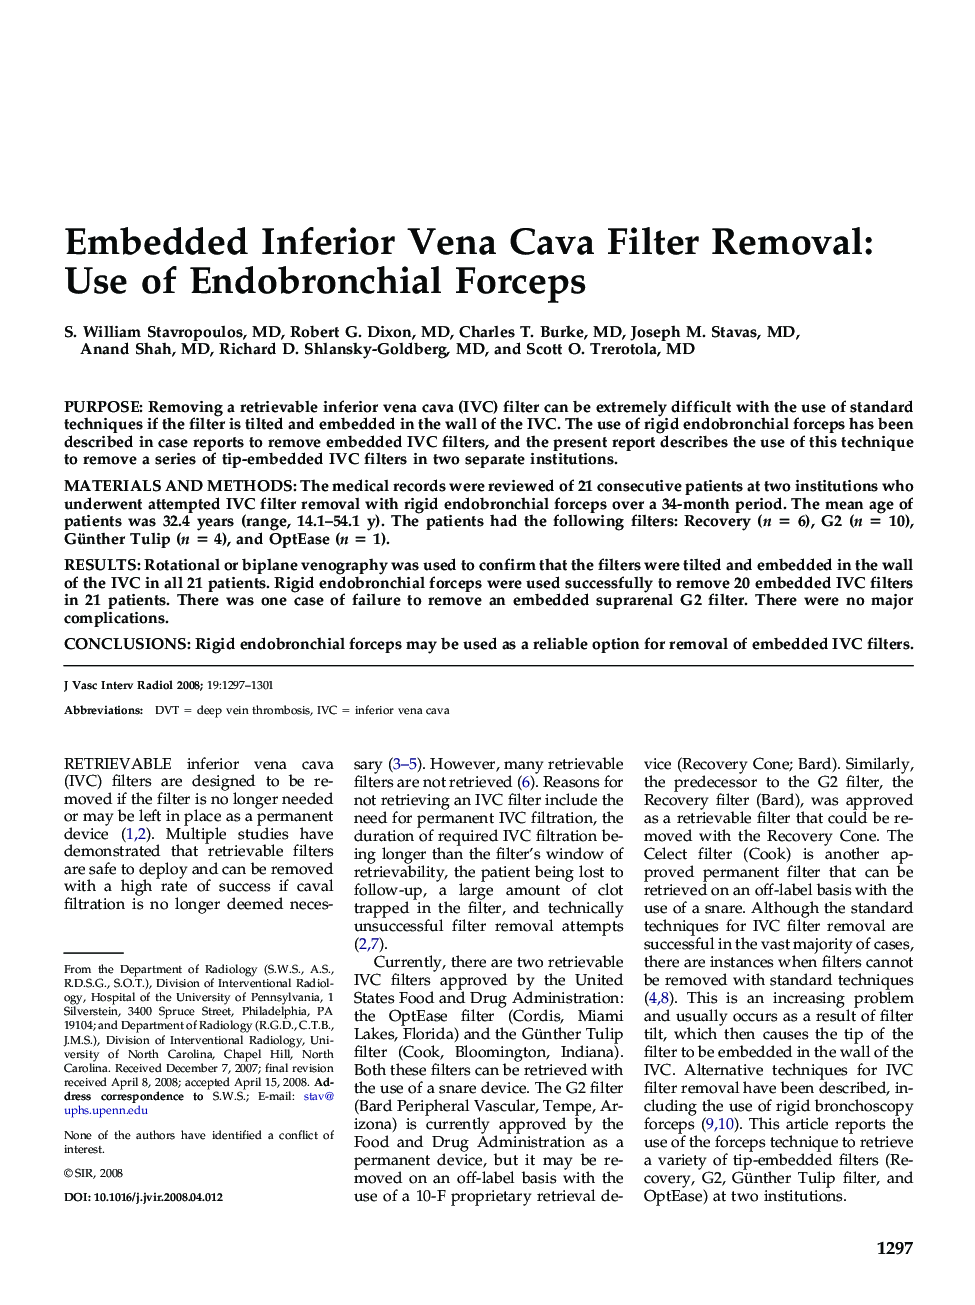 Embedded Inferior Vena Cava Filter Removal: Use of Endobronchial Forceps